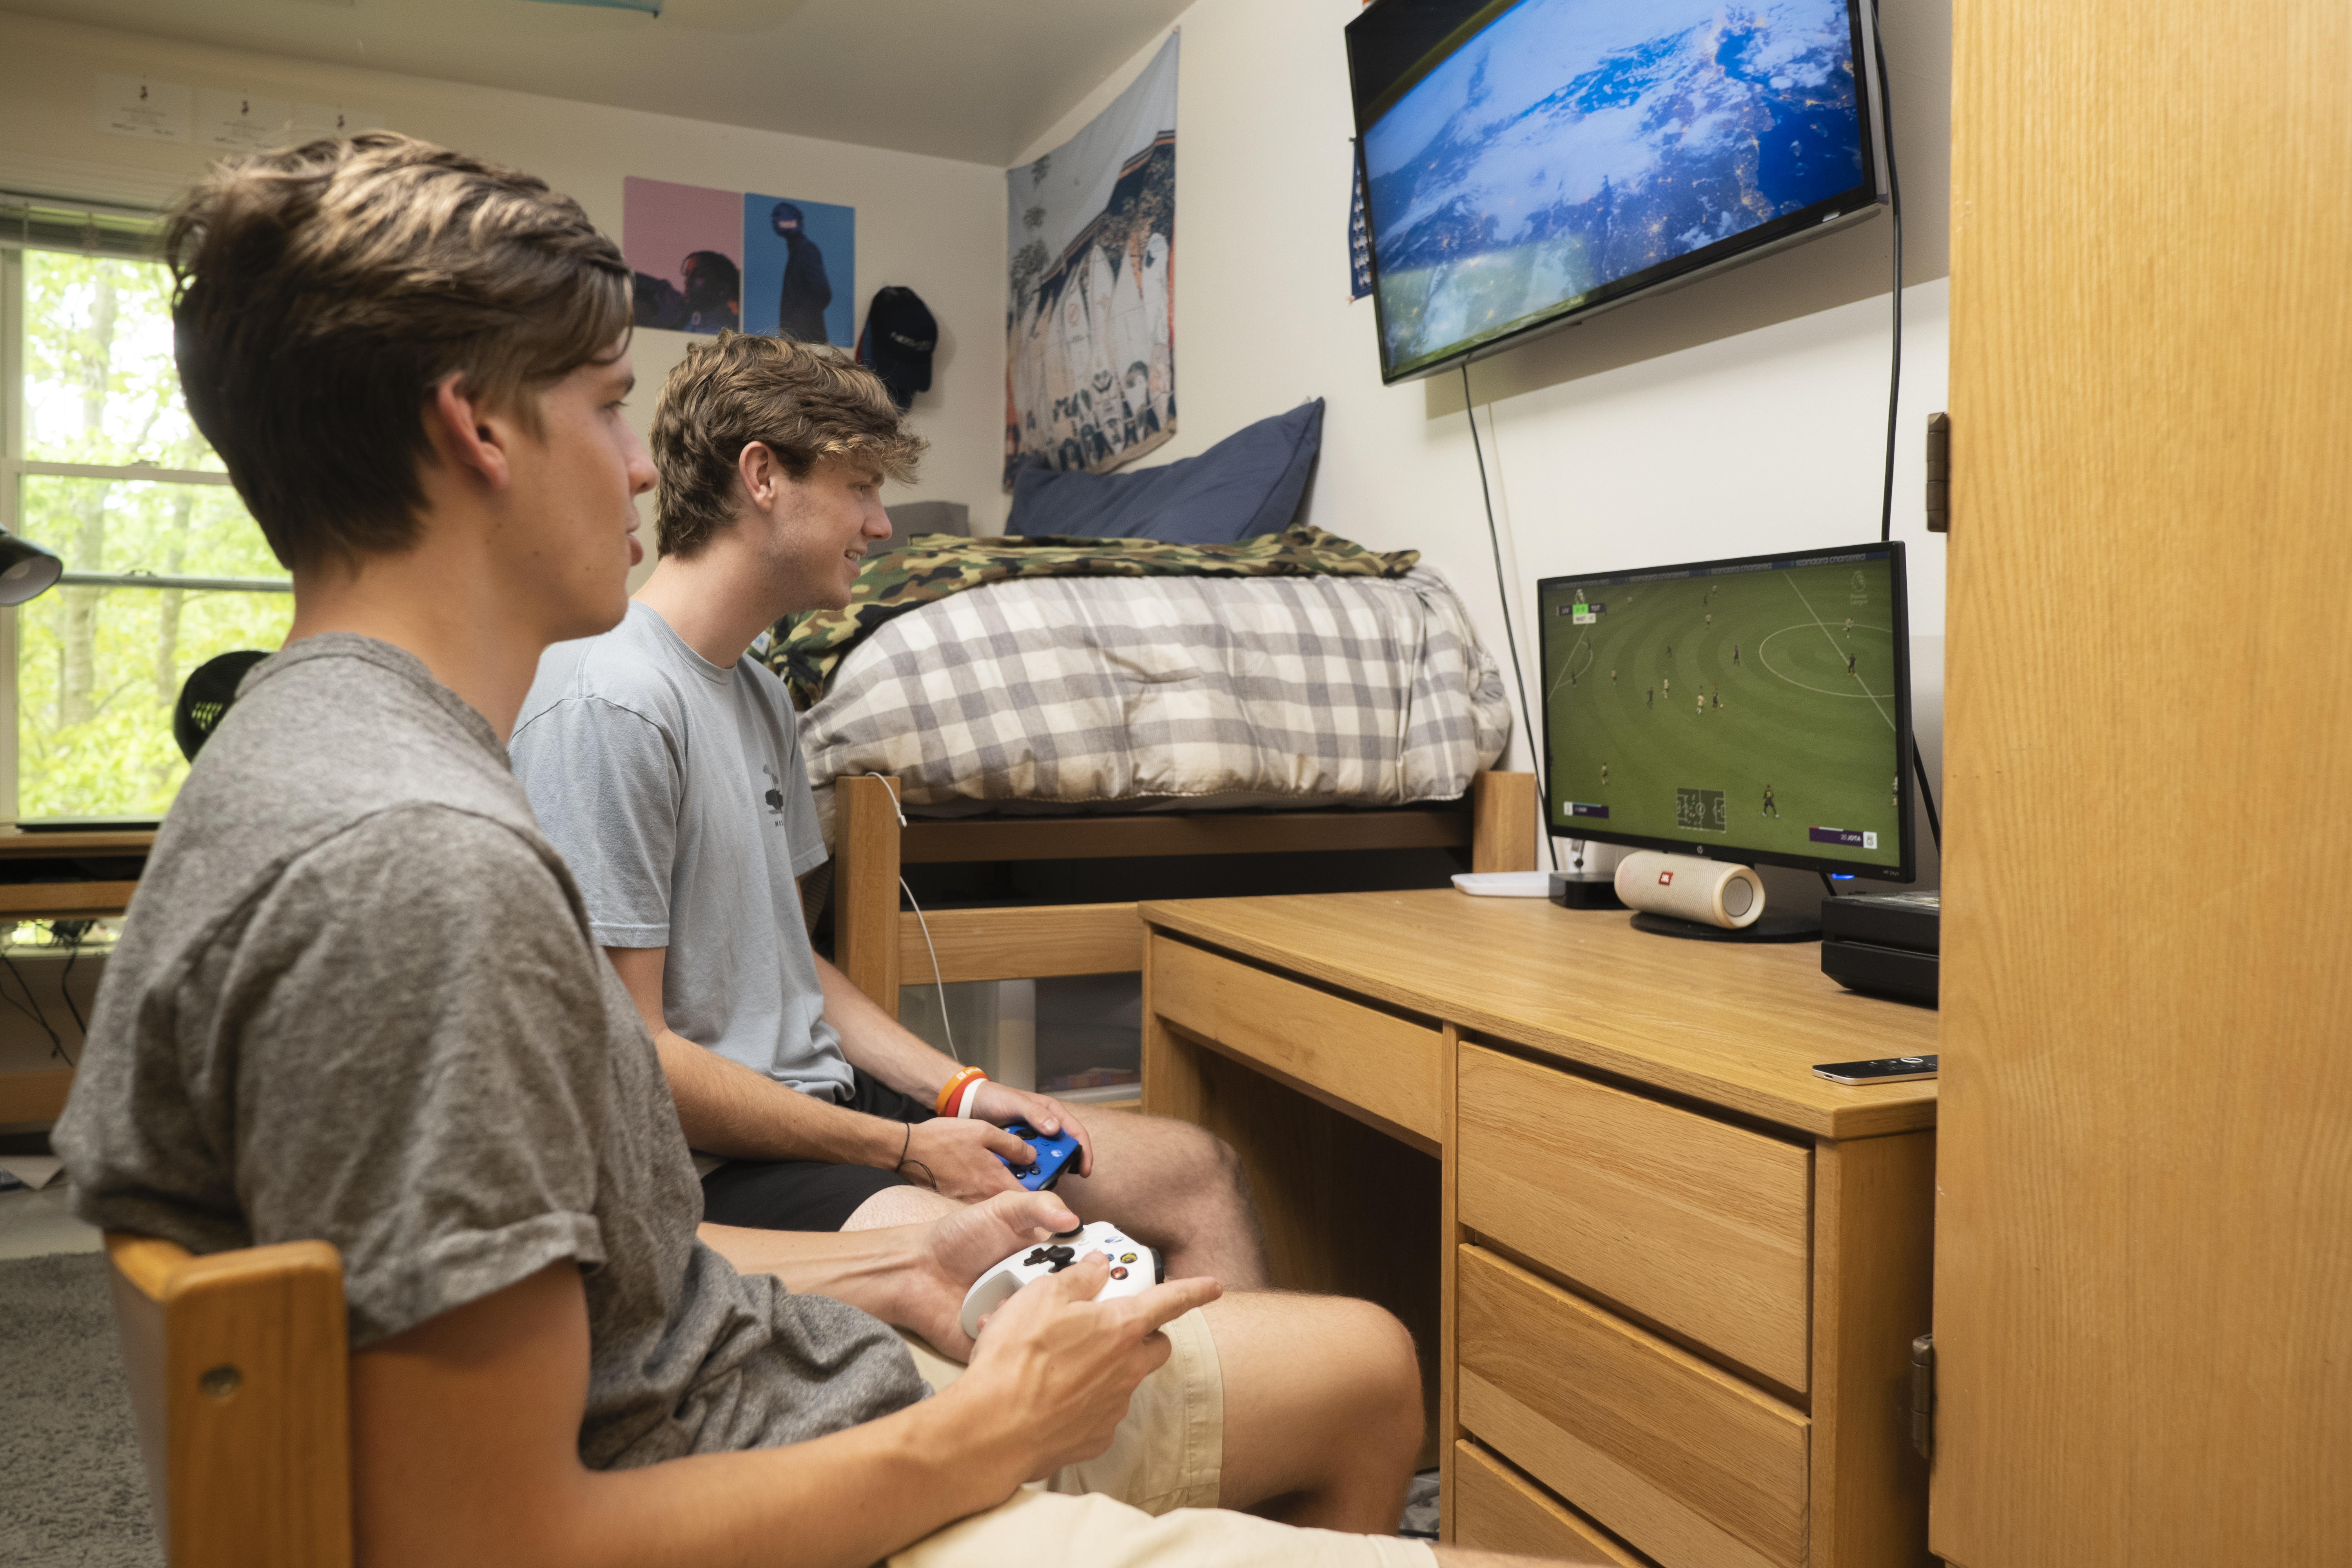 Two guys playing video games at a computer in their room at Loy Center.